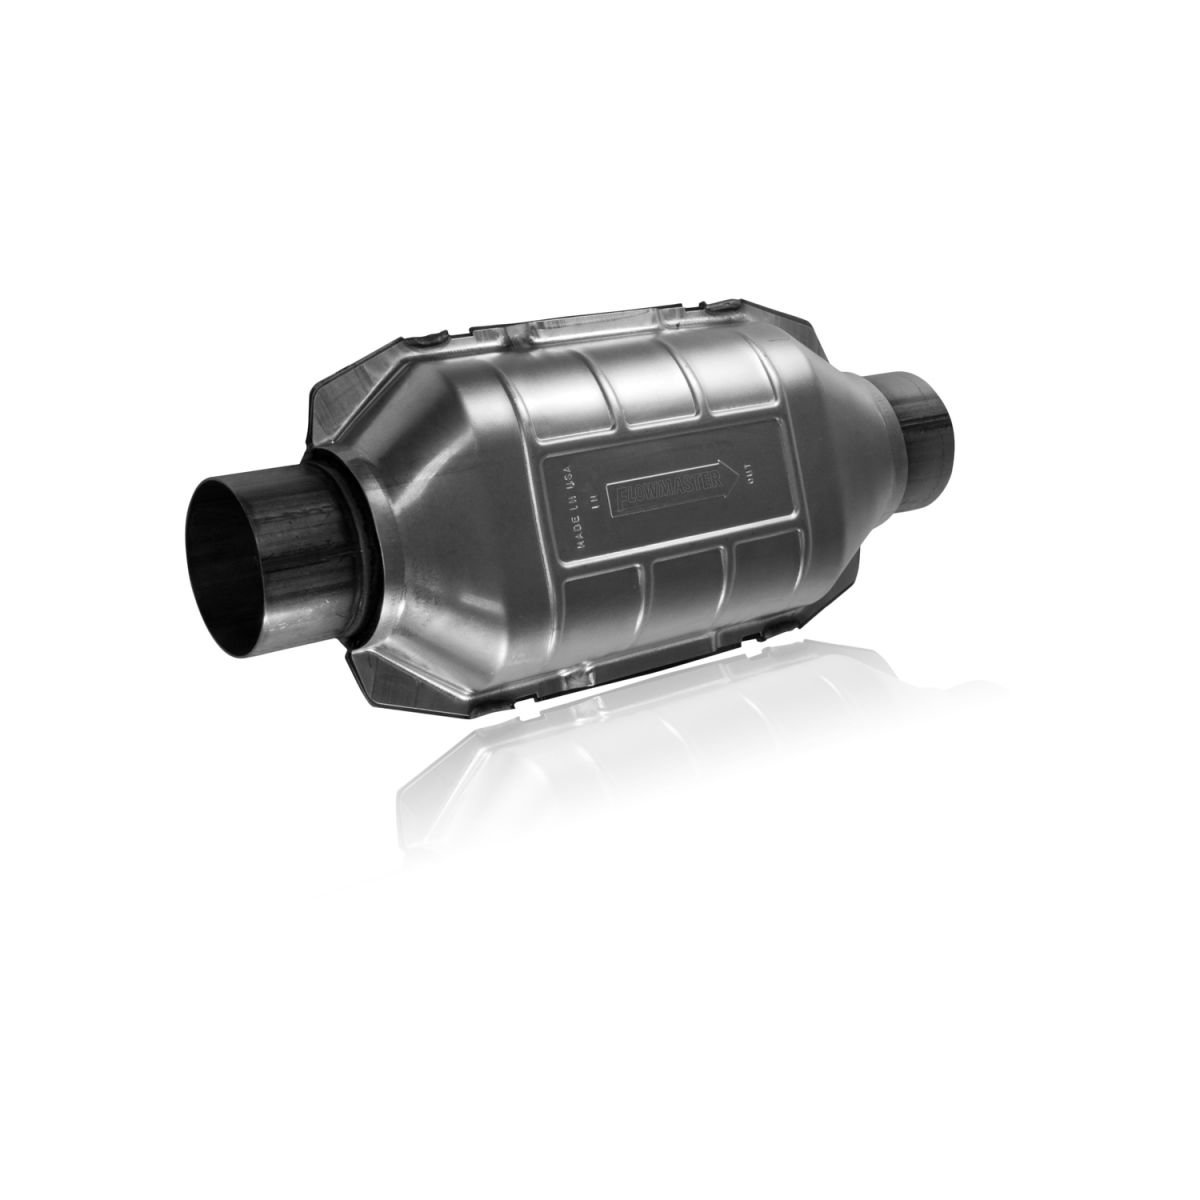 Flowmaster Introduces 49-State Legal Catalytic Converters